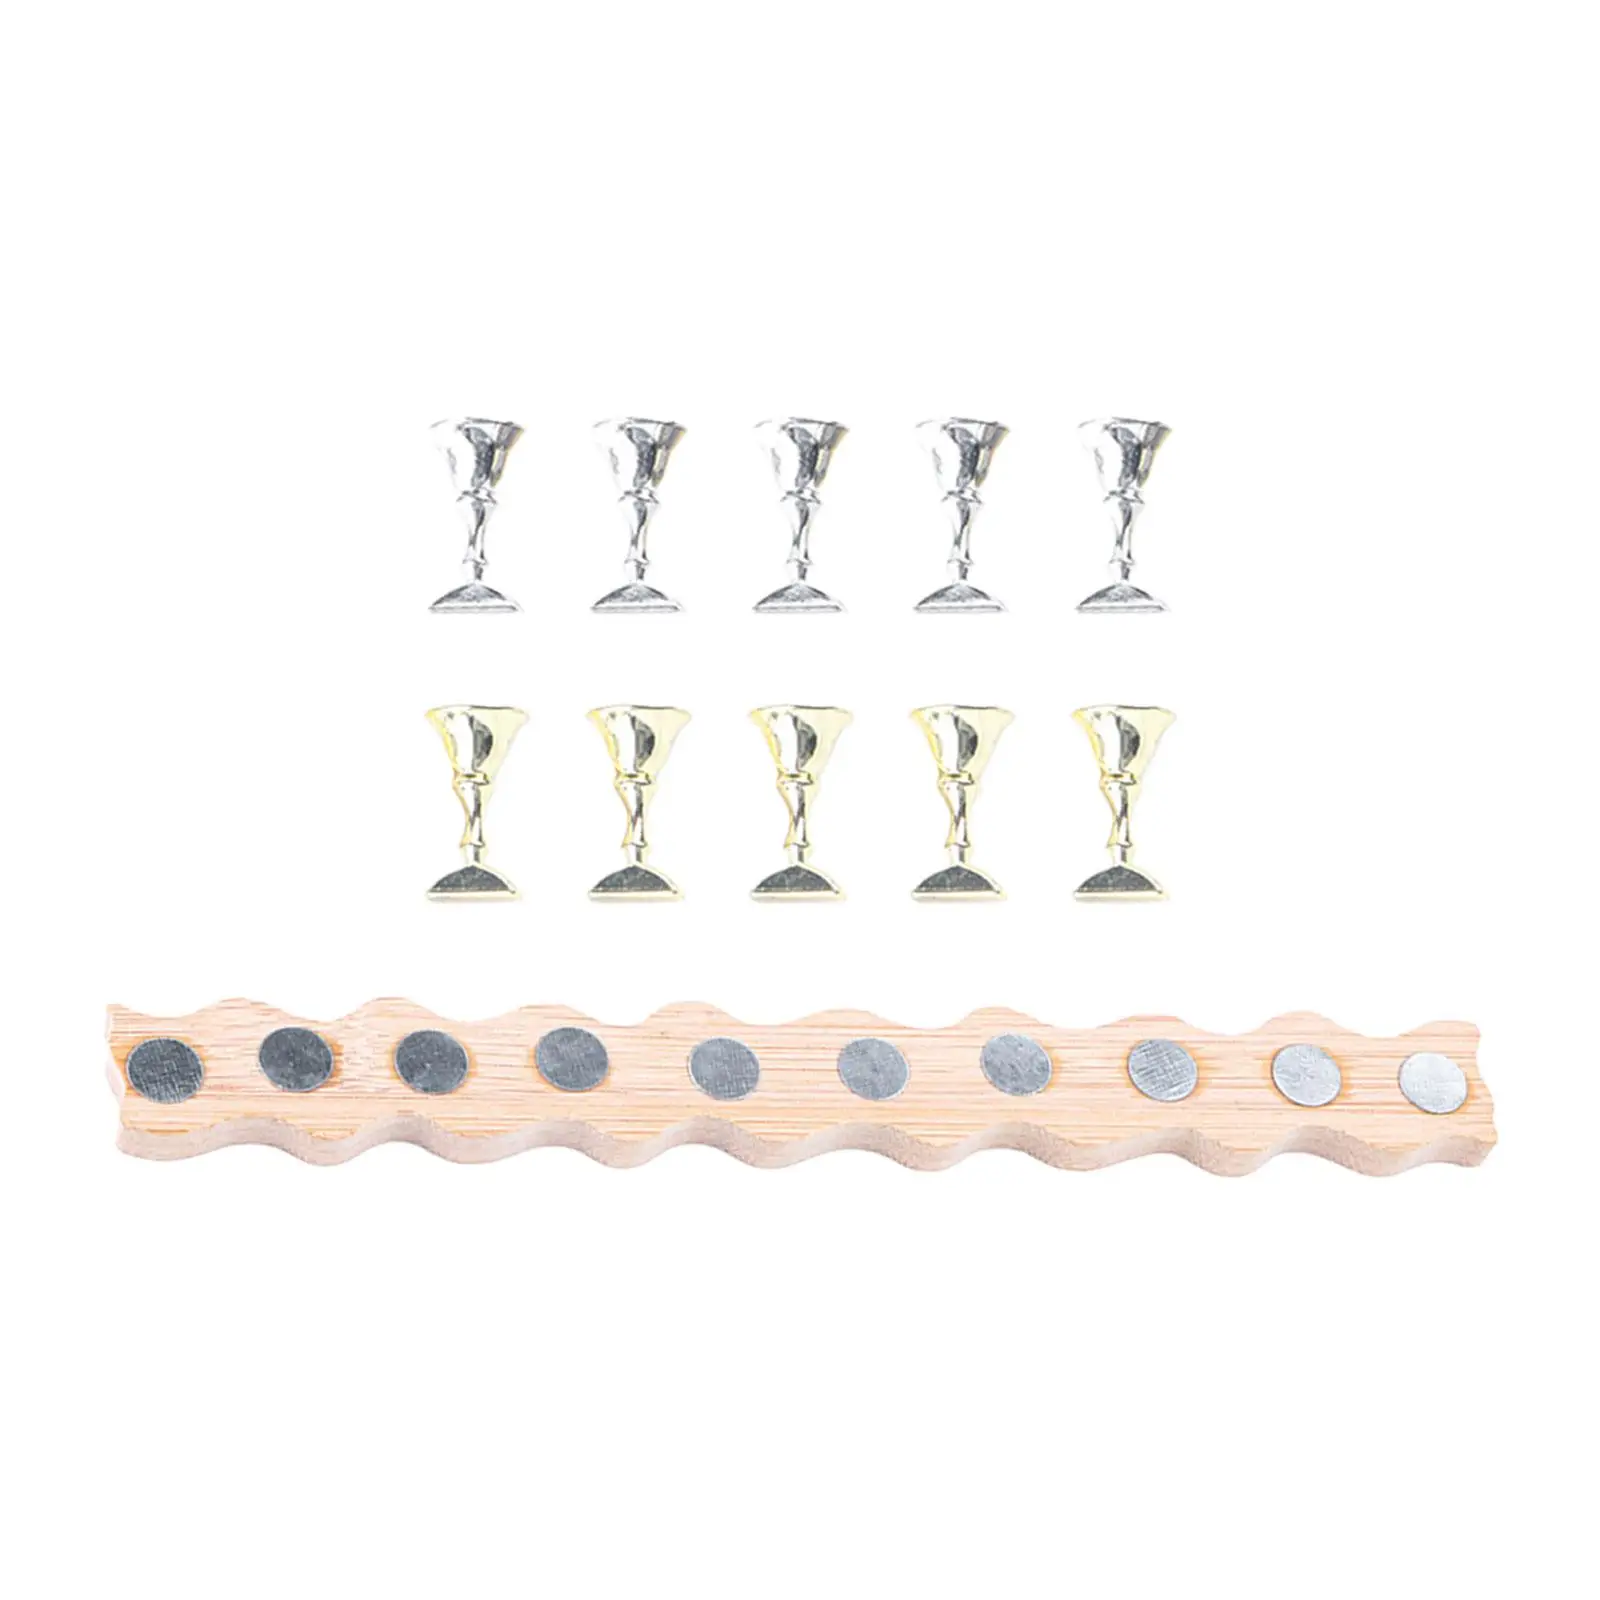 Nail Art Practice Stand Accessories Manicure Tool Durable Reusable Fingernail Display Stands for Beginner Makeup Home Salon DIY